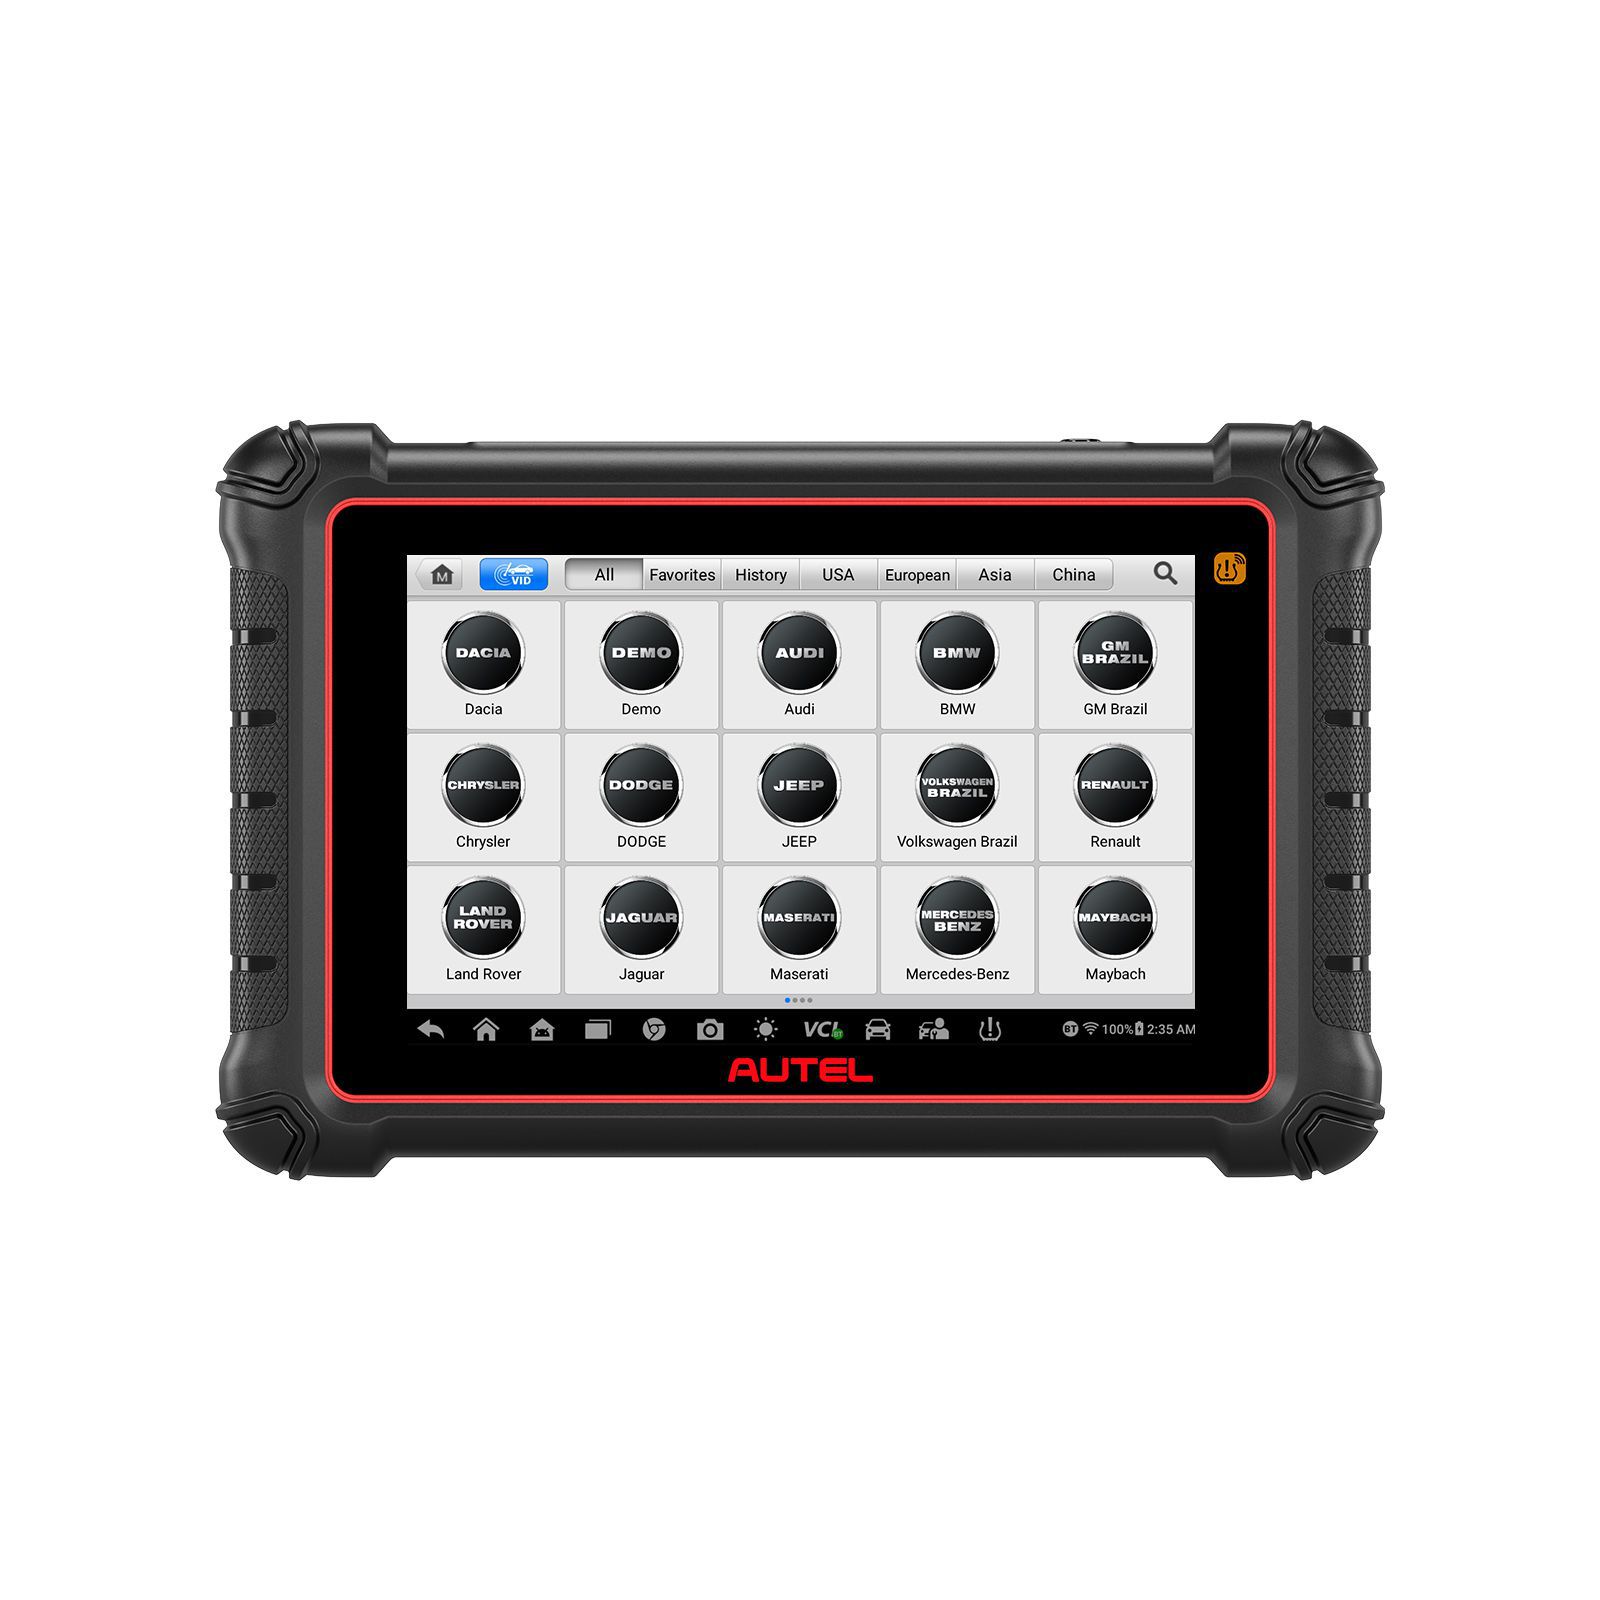 Autel MaxiPro MP900TS Android 11 All System Diagnostic Scanner mit TPMS Relearn Rest Programmierung Upgraded von MP808TS